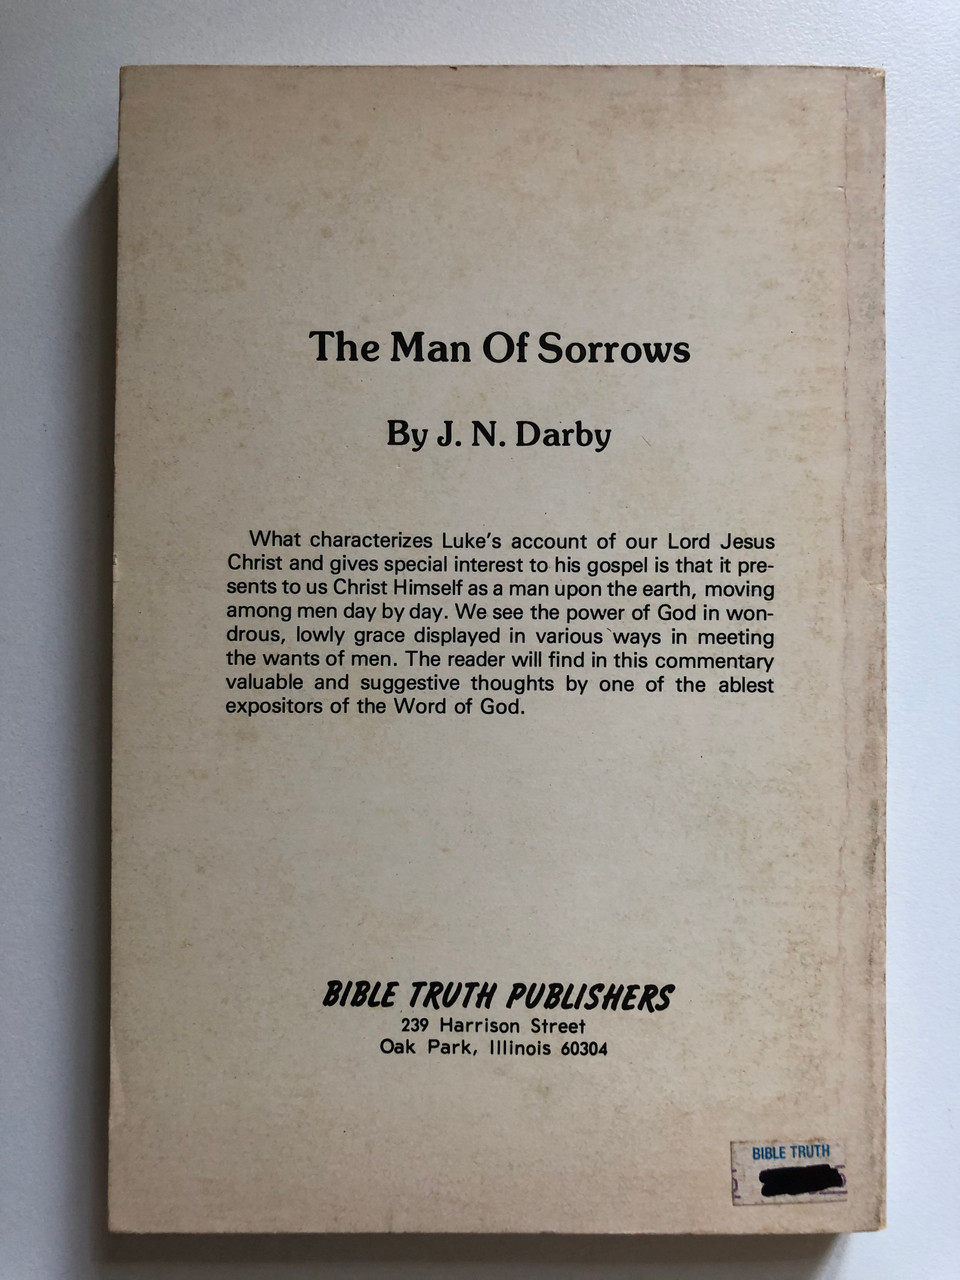 The_Man_Of_Sorrows_by_John_Nelson_Darby_Chapter_by_chapter_commentary_on_the_Gospel_of_Luke_Publisher_BIBLE_TRUTH_PUBLISHERS_JNDarby_2__79603.1691332281.1280.1280.JPG (960×1280)